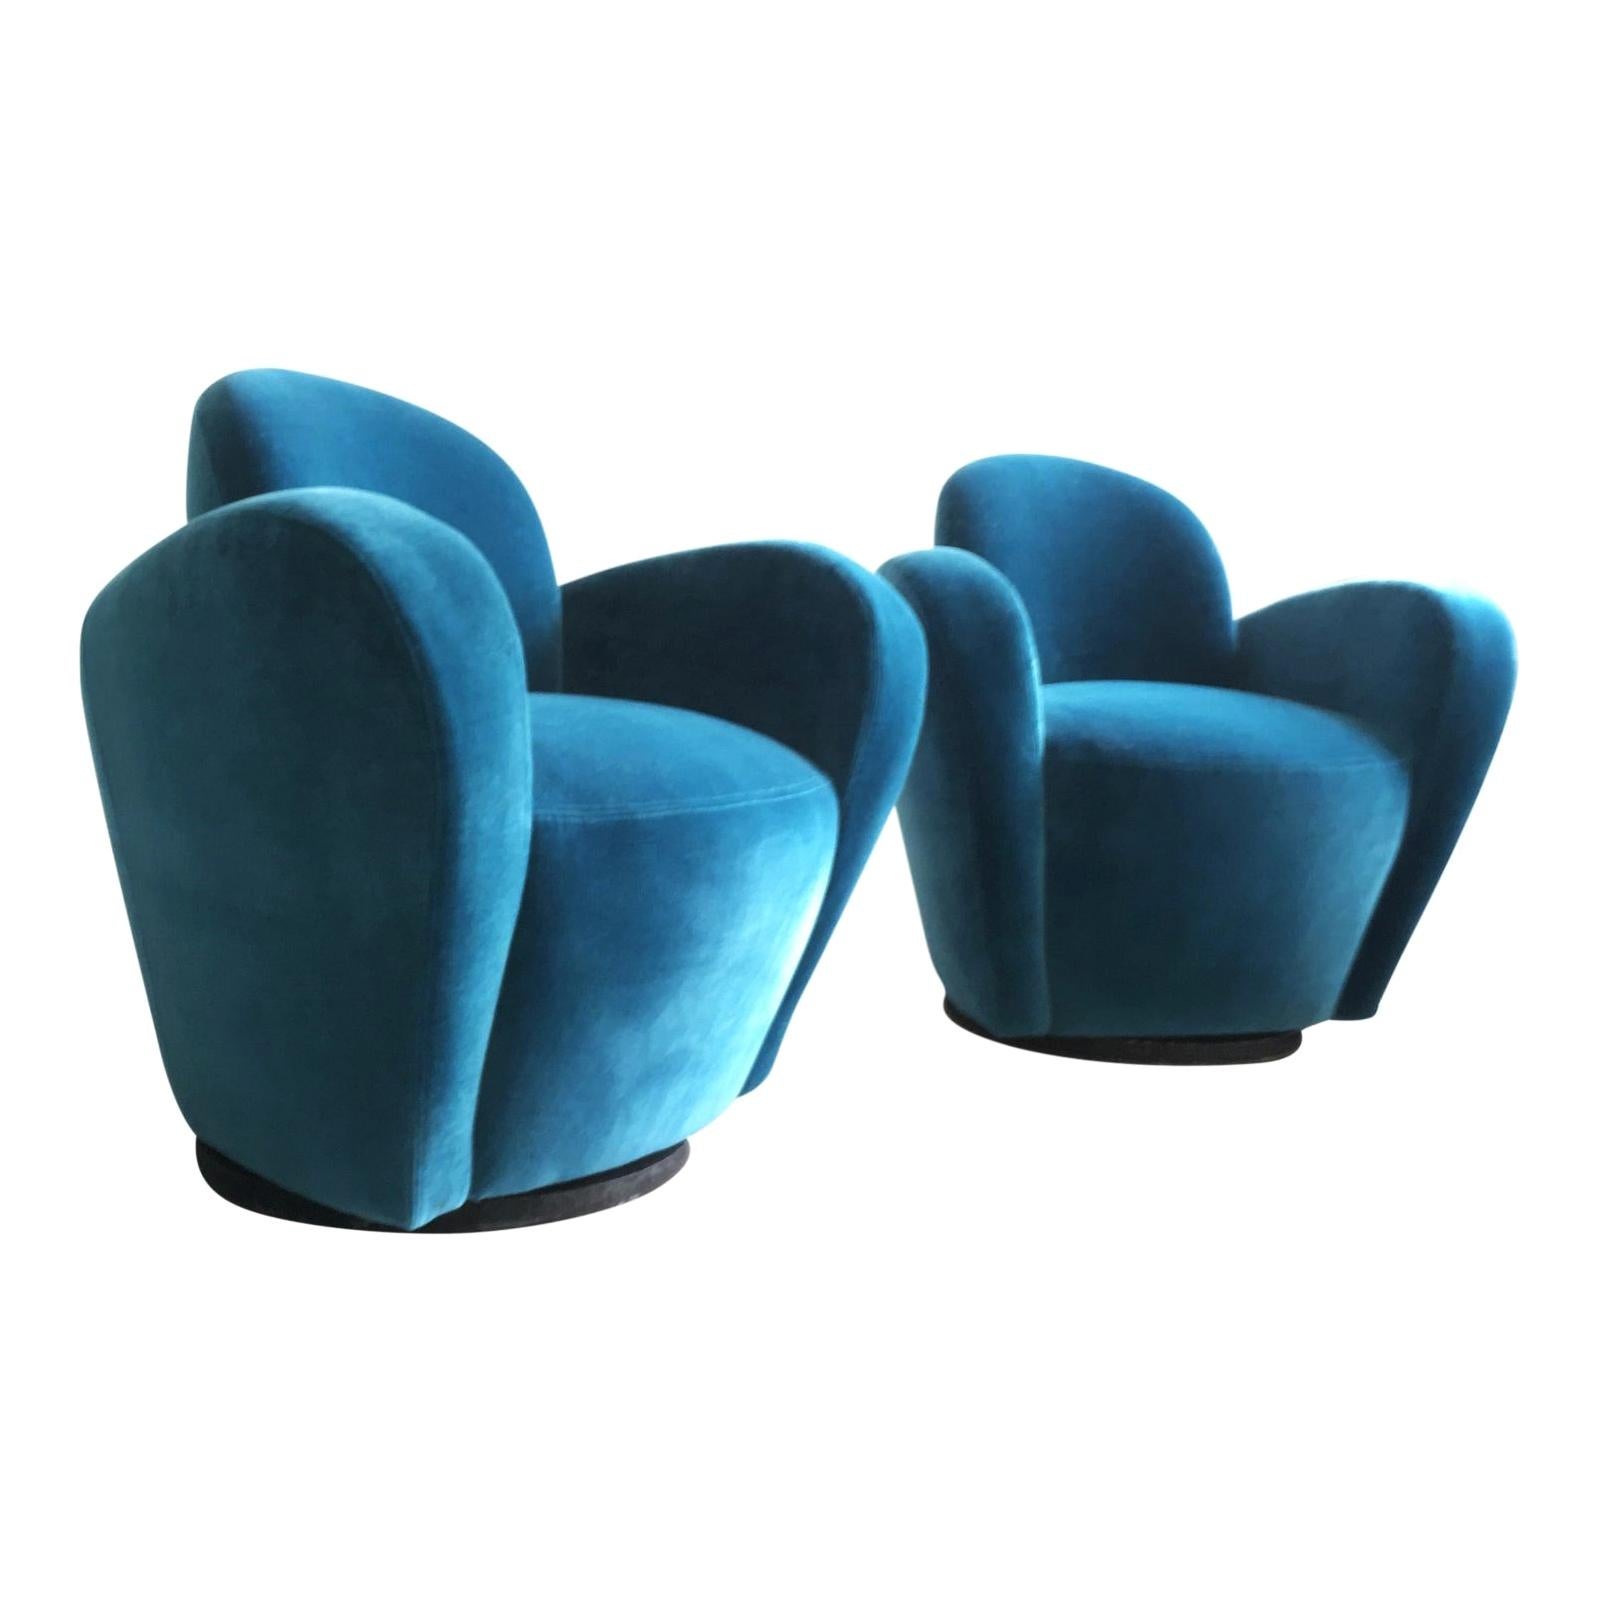 Pair of Swivel Lounge Chairs by Directional